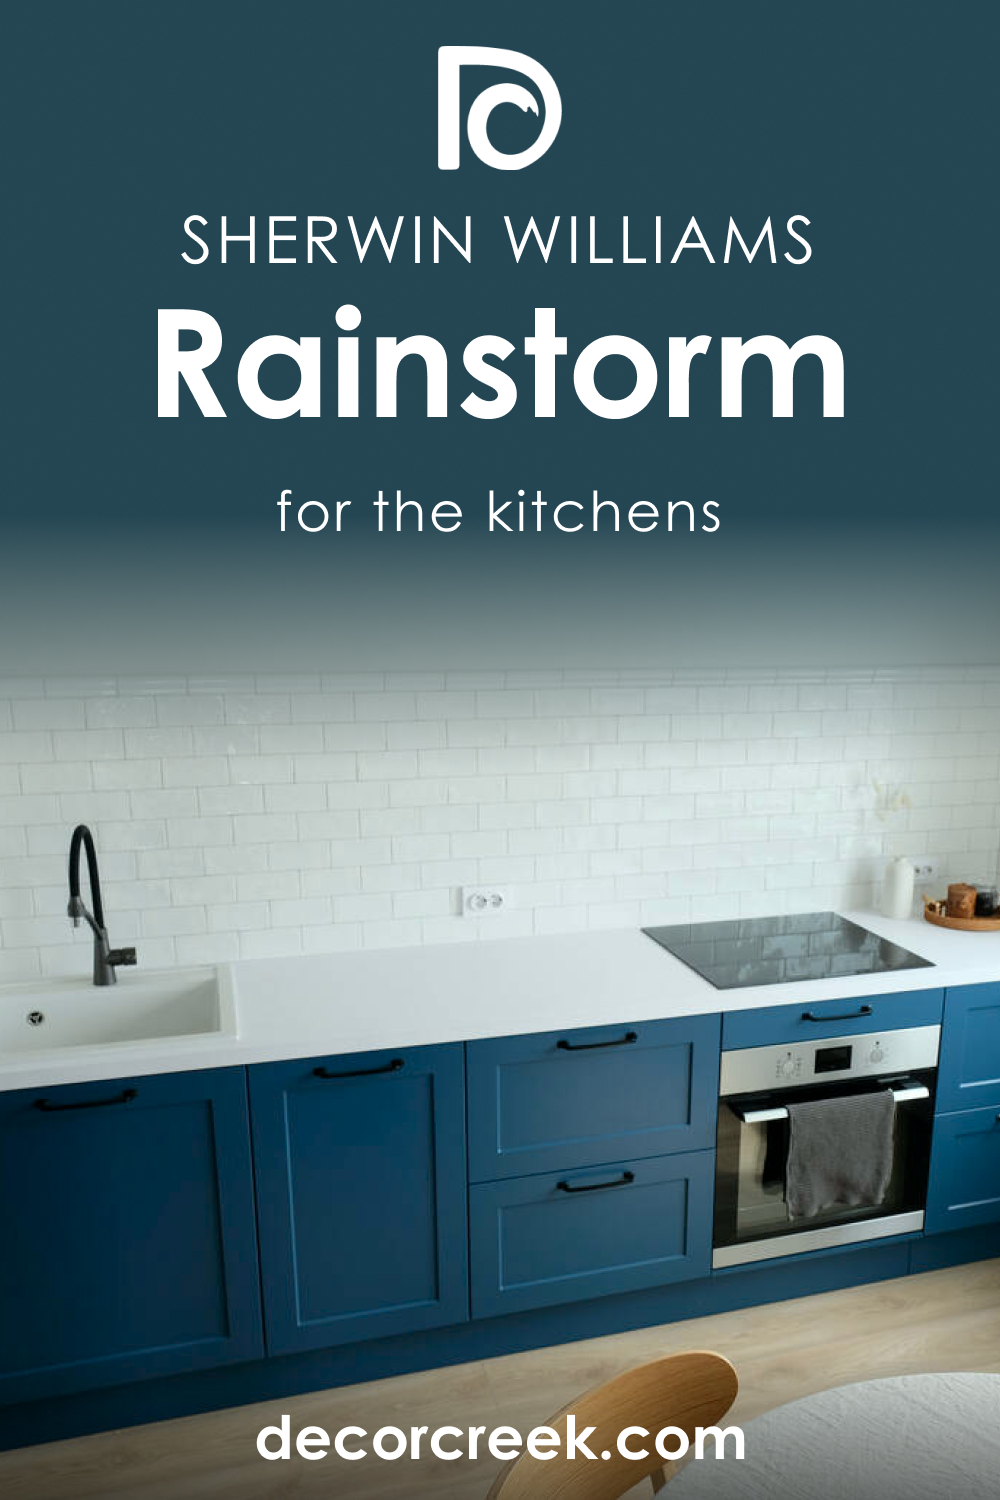 How to Use SW 6230 Rainstorm for the Kitchen?